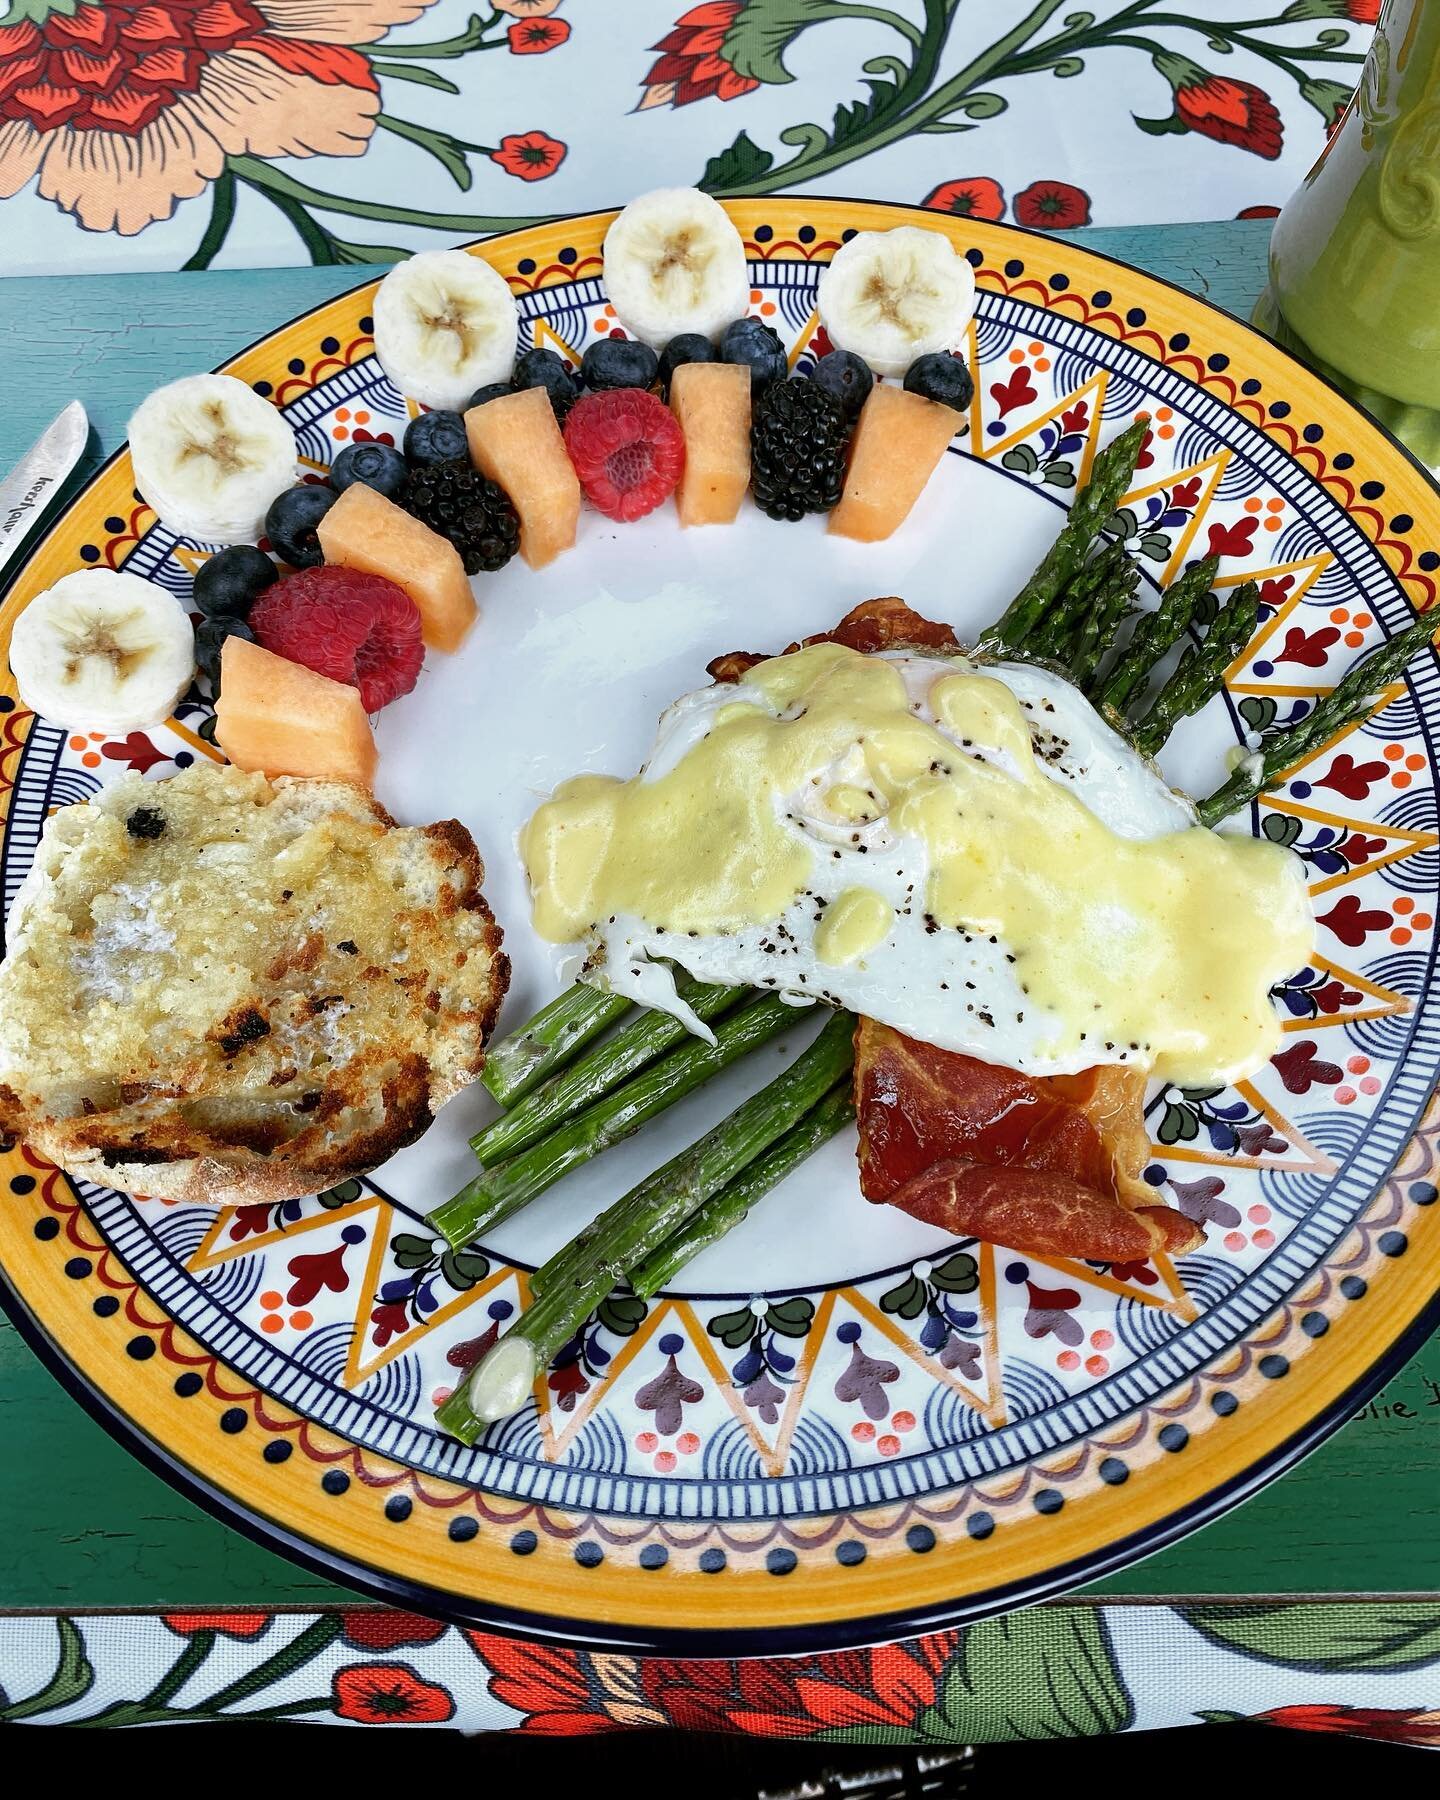 My favorite breakfast - roasted asparagus &amp; prosciutto topped with a basted egg &amp; hollandaise, english muffin, fresh fruit &amp; coffee #delish #breakfast #toohottocook